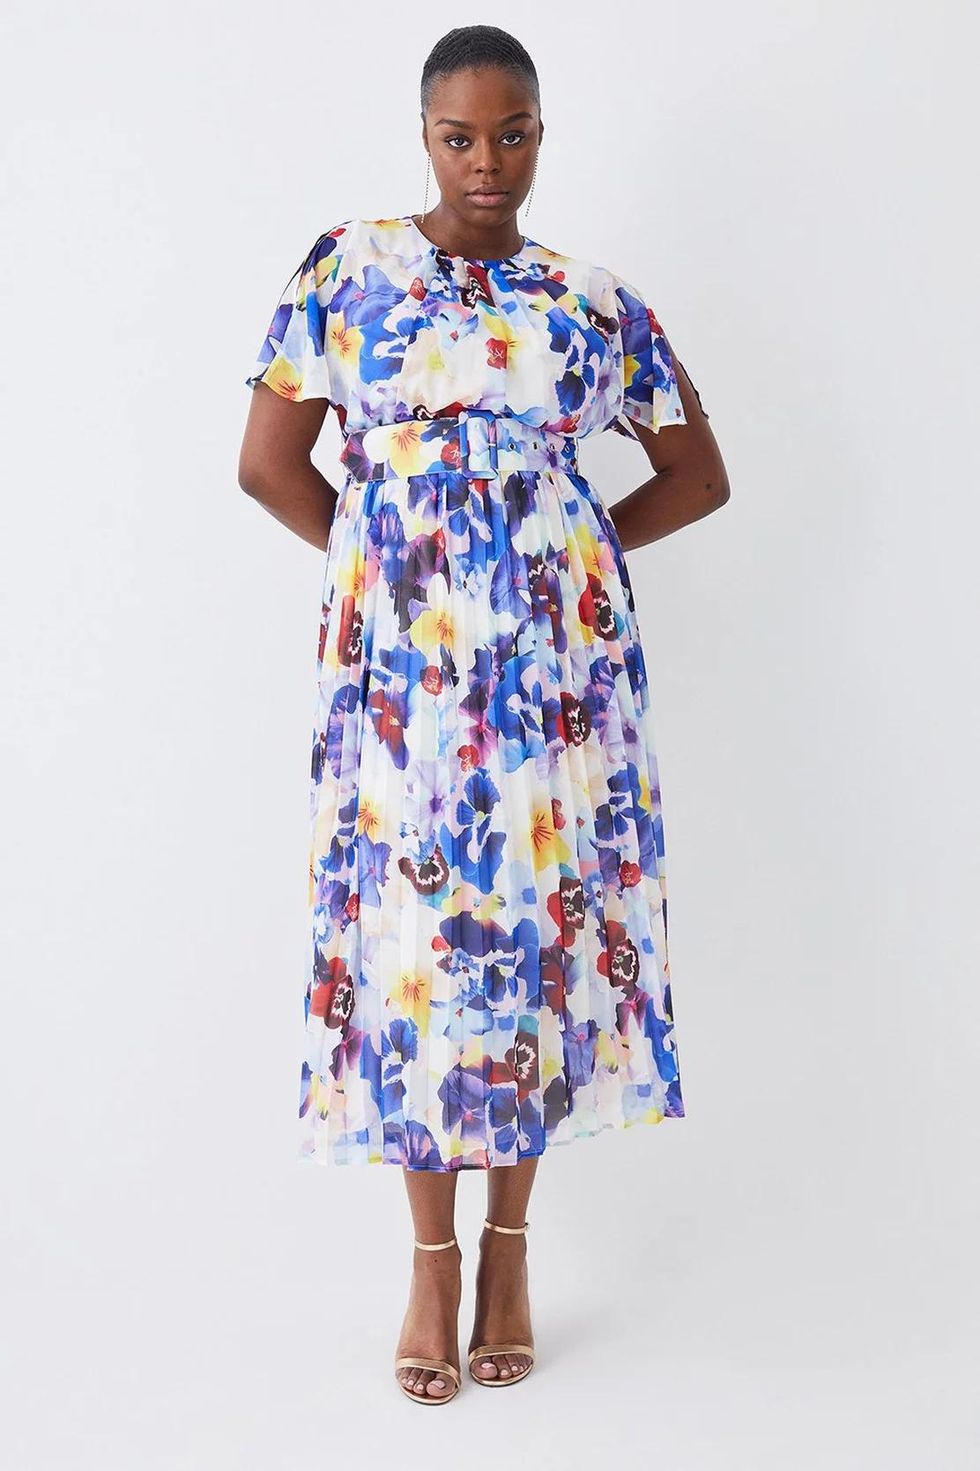 2023 Best Easter Dresses + Accessories - SheShe Show